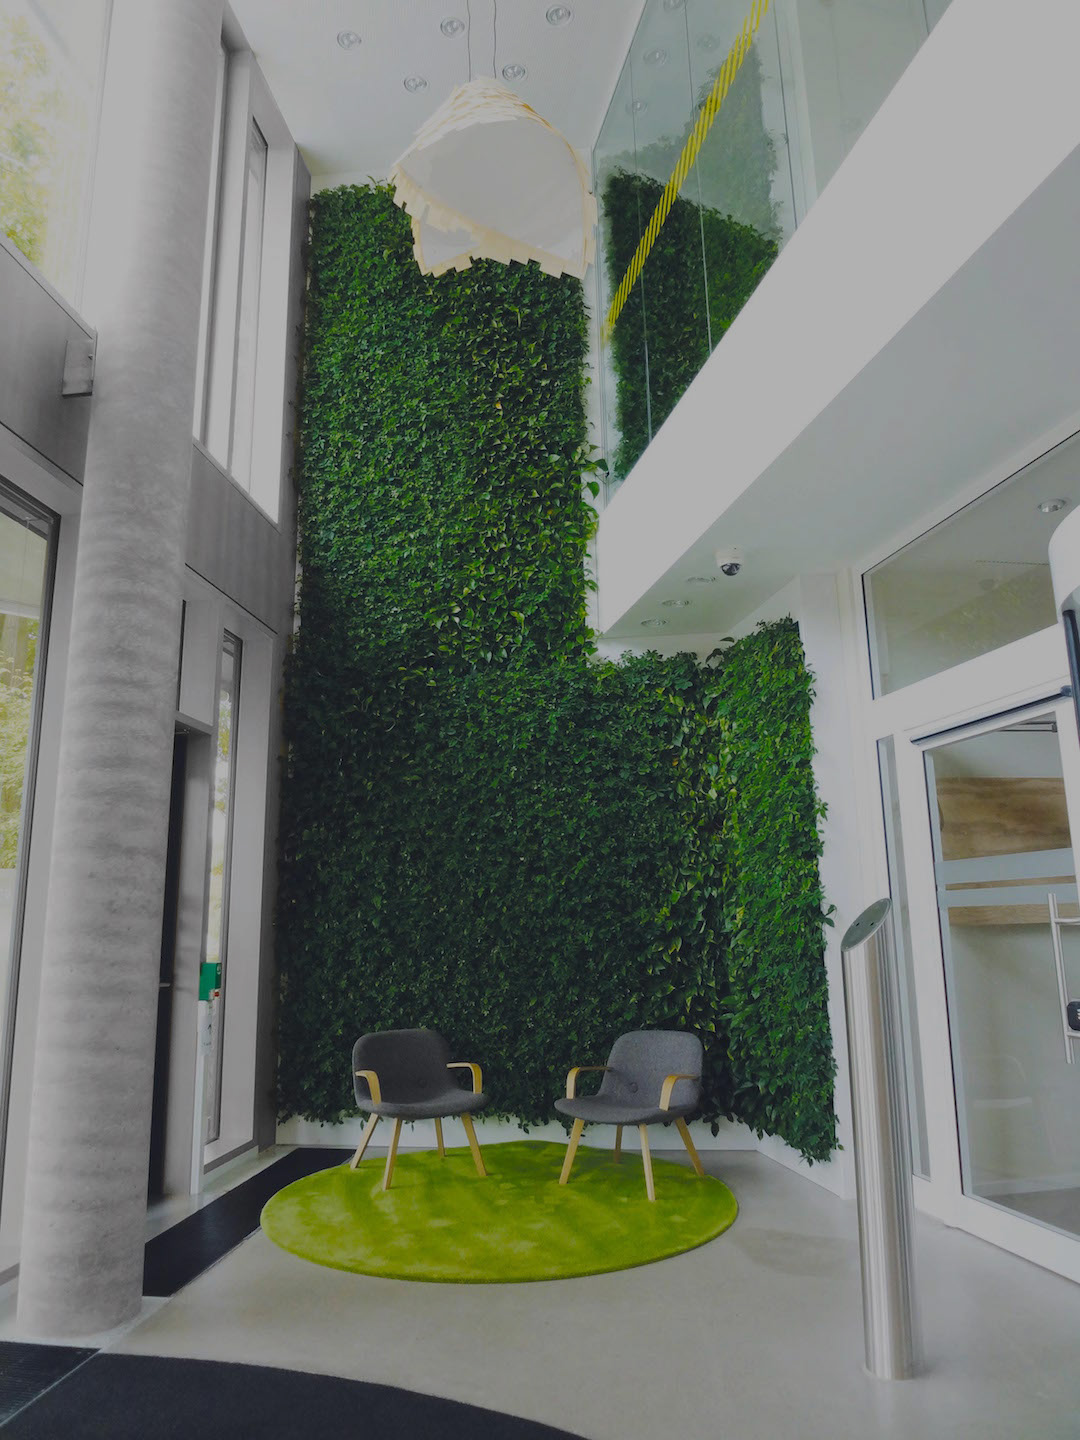 Living wall installed inside a building